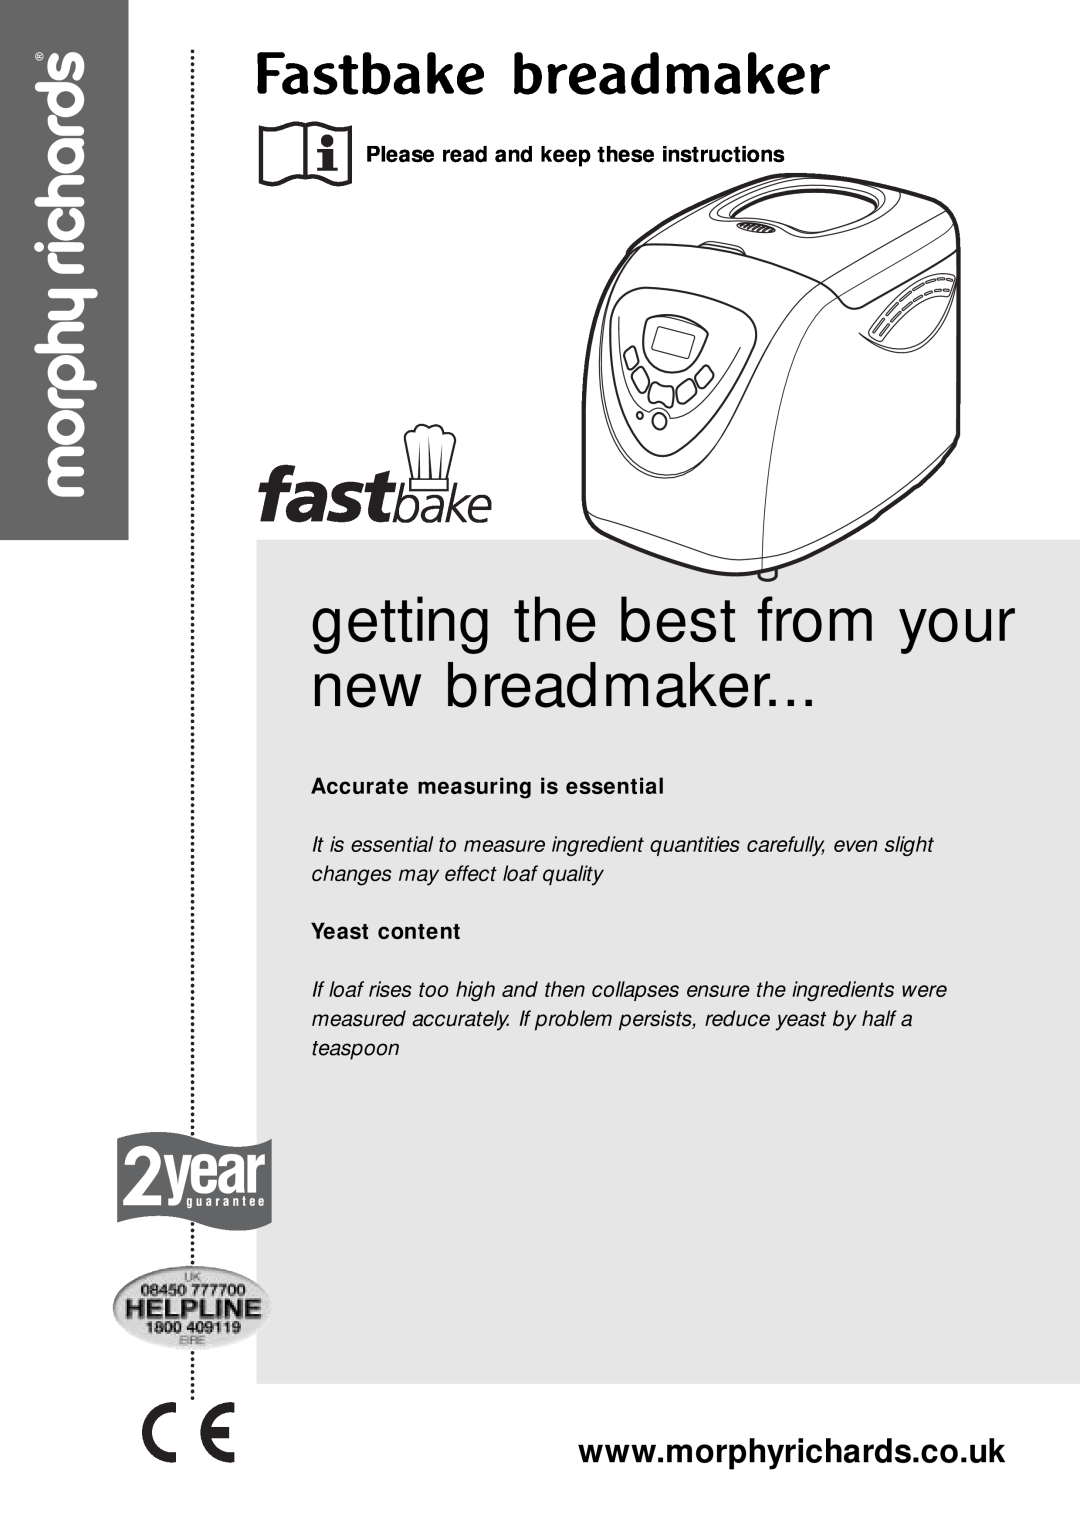 Morphy Richards Fastbake breadmaker manual Please read and keep these instructions, Accurate measuring is essential 